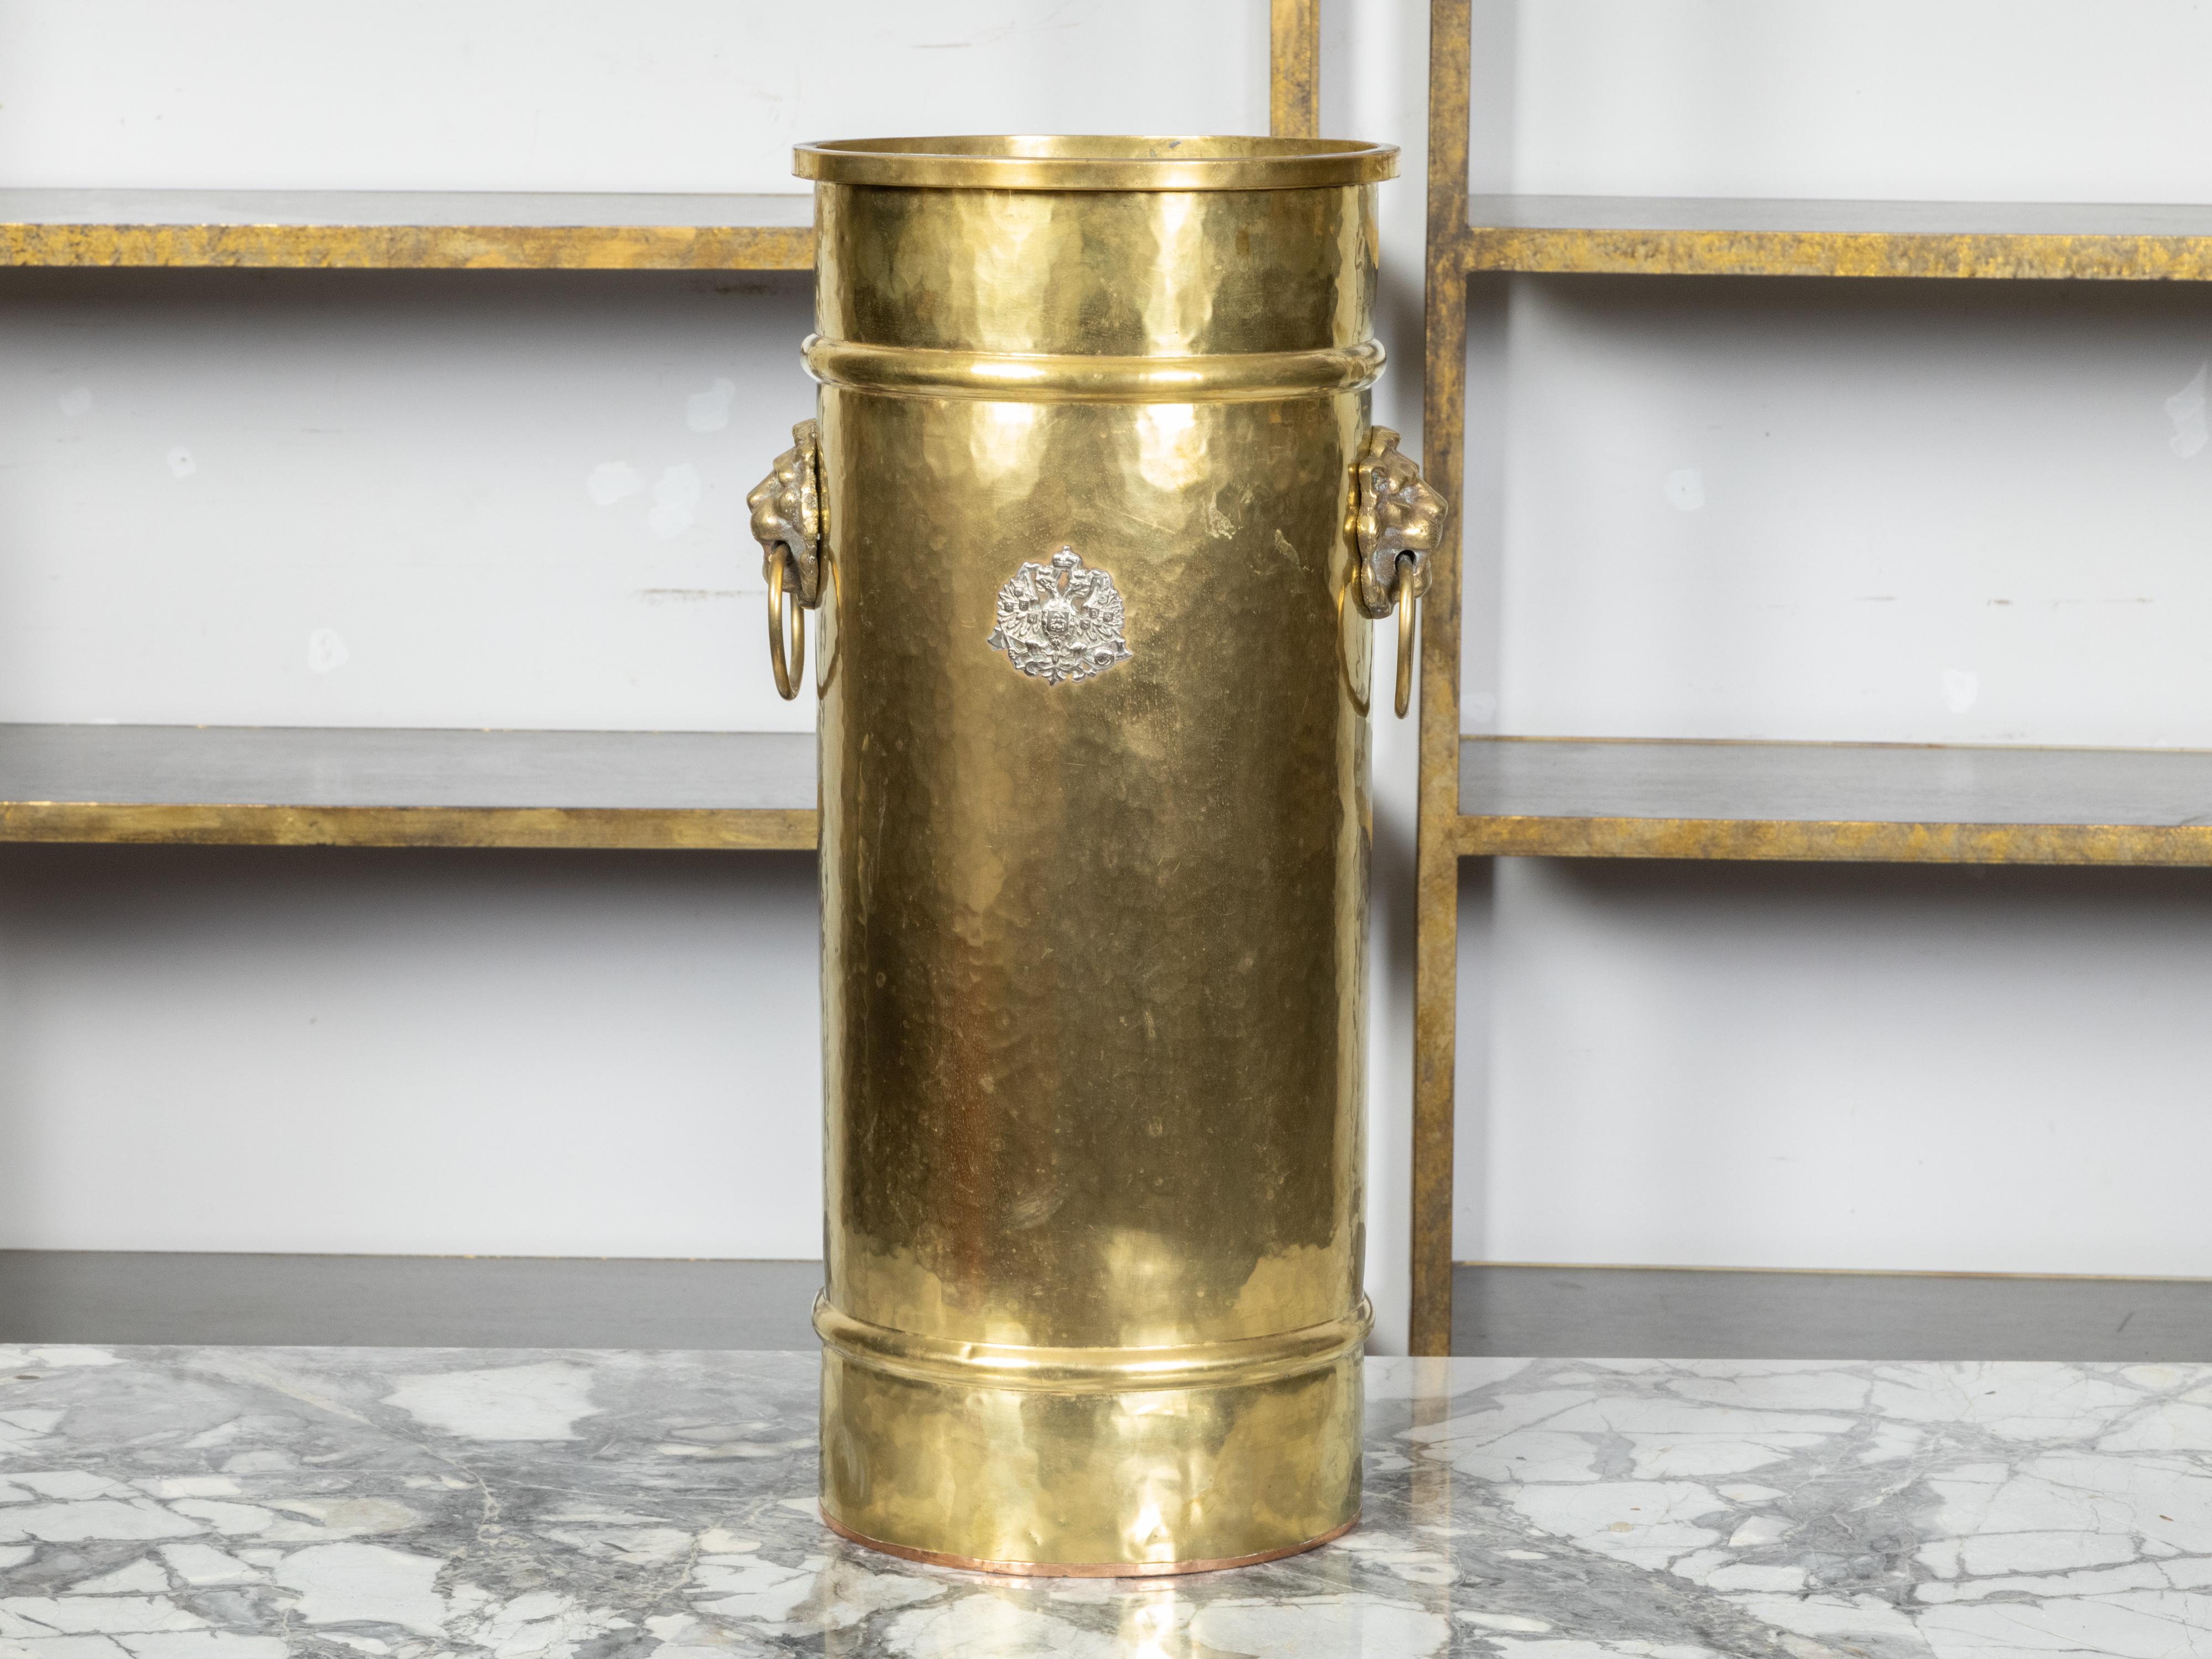 An English brass umbrella stand from the early 20th century, with lion ring pulls and heraldic coat of arms. Created in England during the Roaring Twenties, this umbrella stand features an oblong cylindrical body adorned with a double-headed eagle